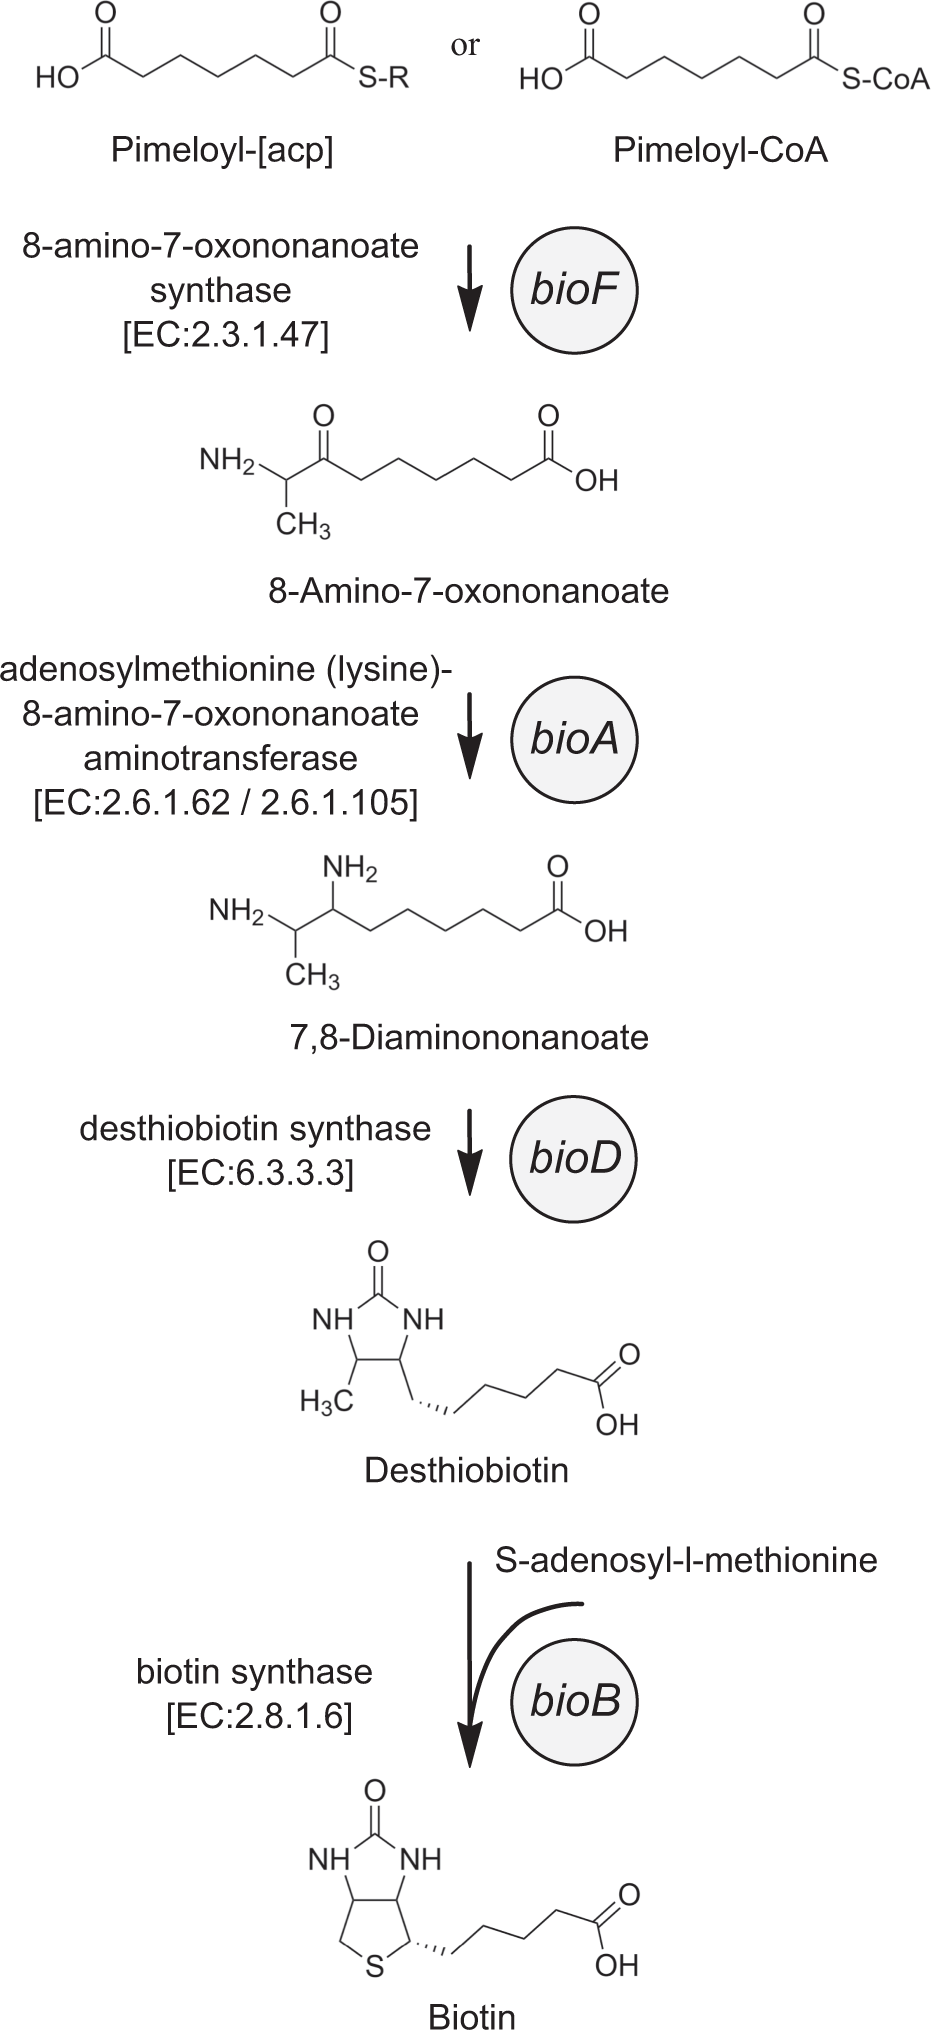 The overlooked role of a biotin precursor for marine bacteria -  desthiobiotin as an escape route for biotin auxotrophy | The ISME Journal